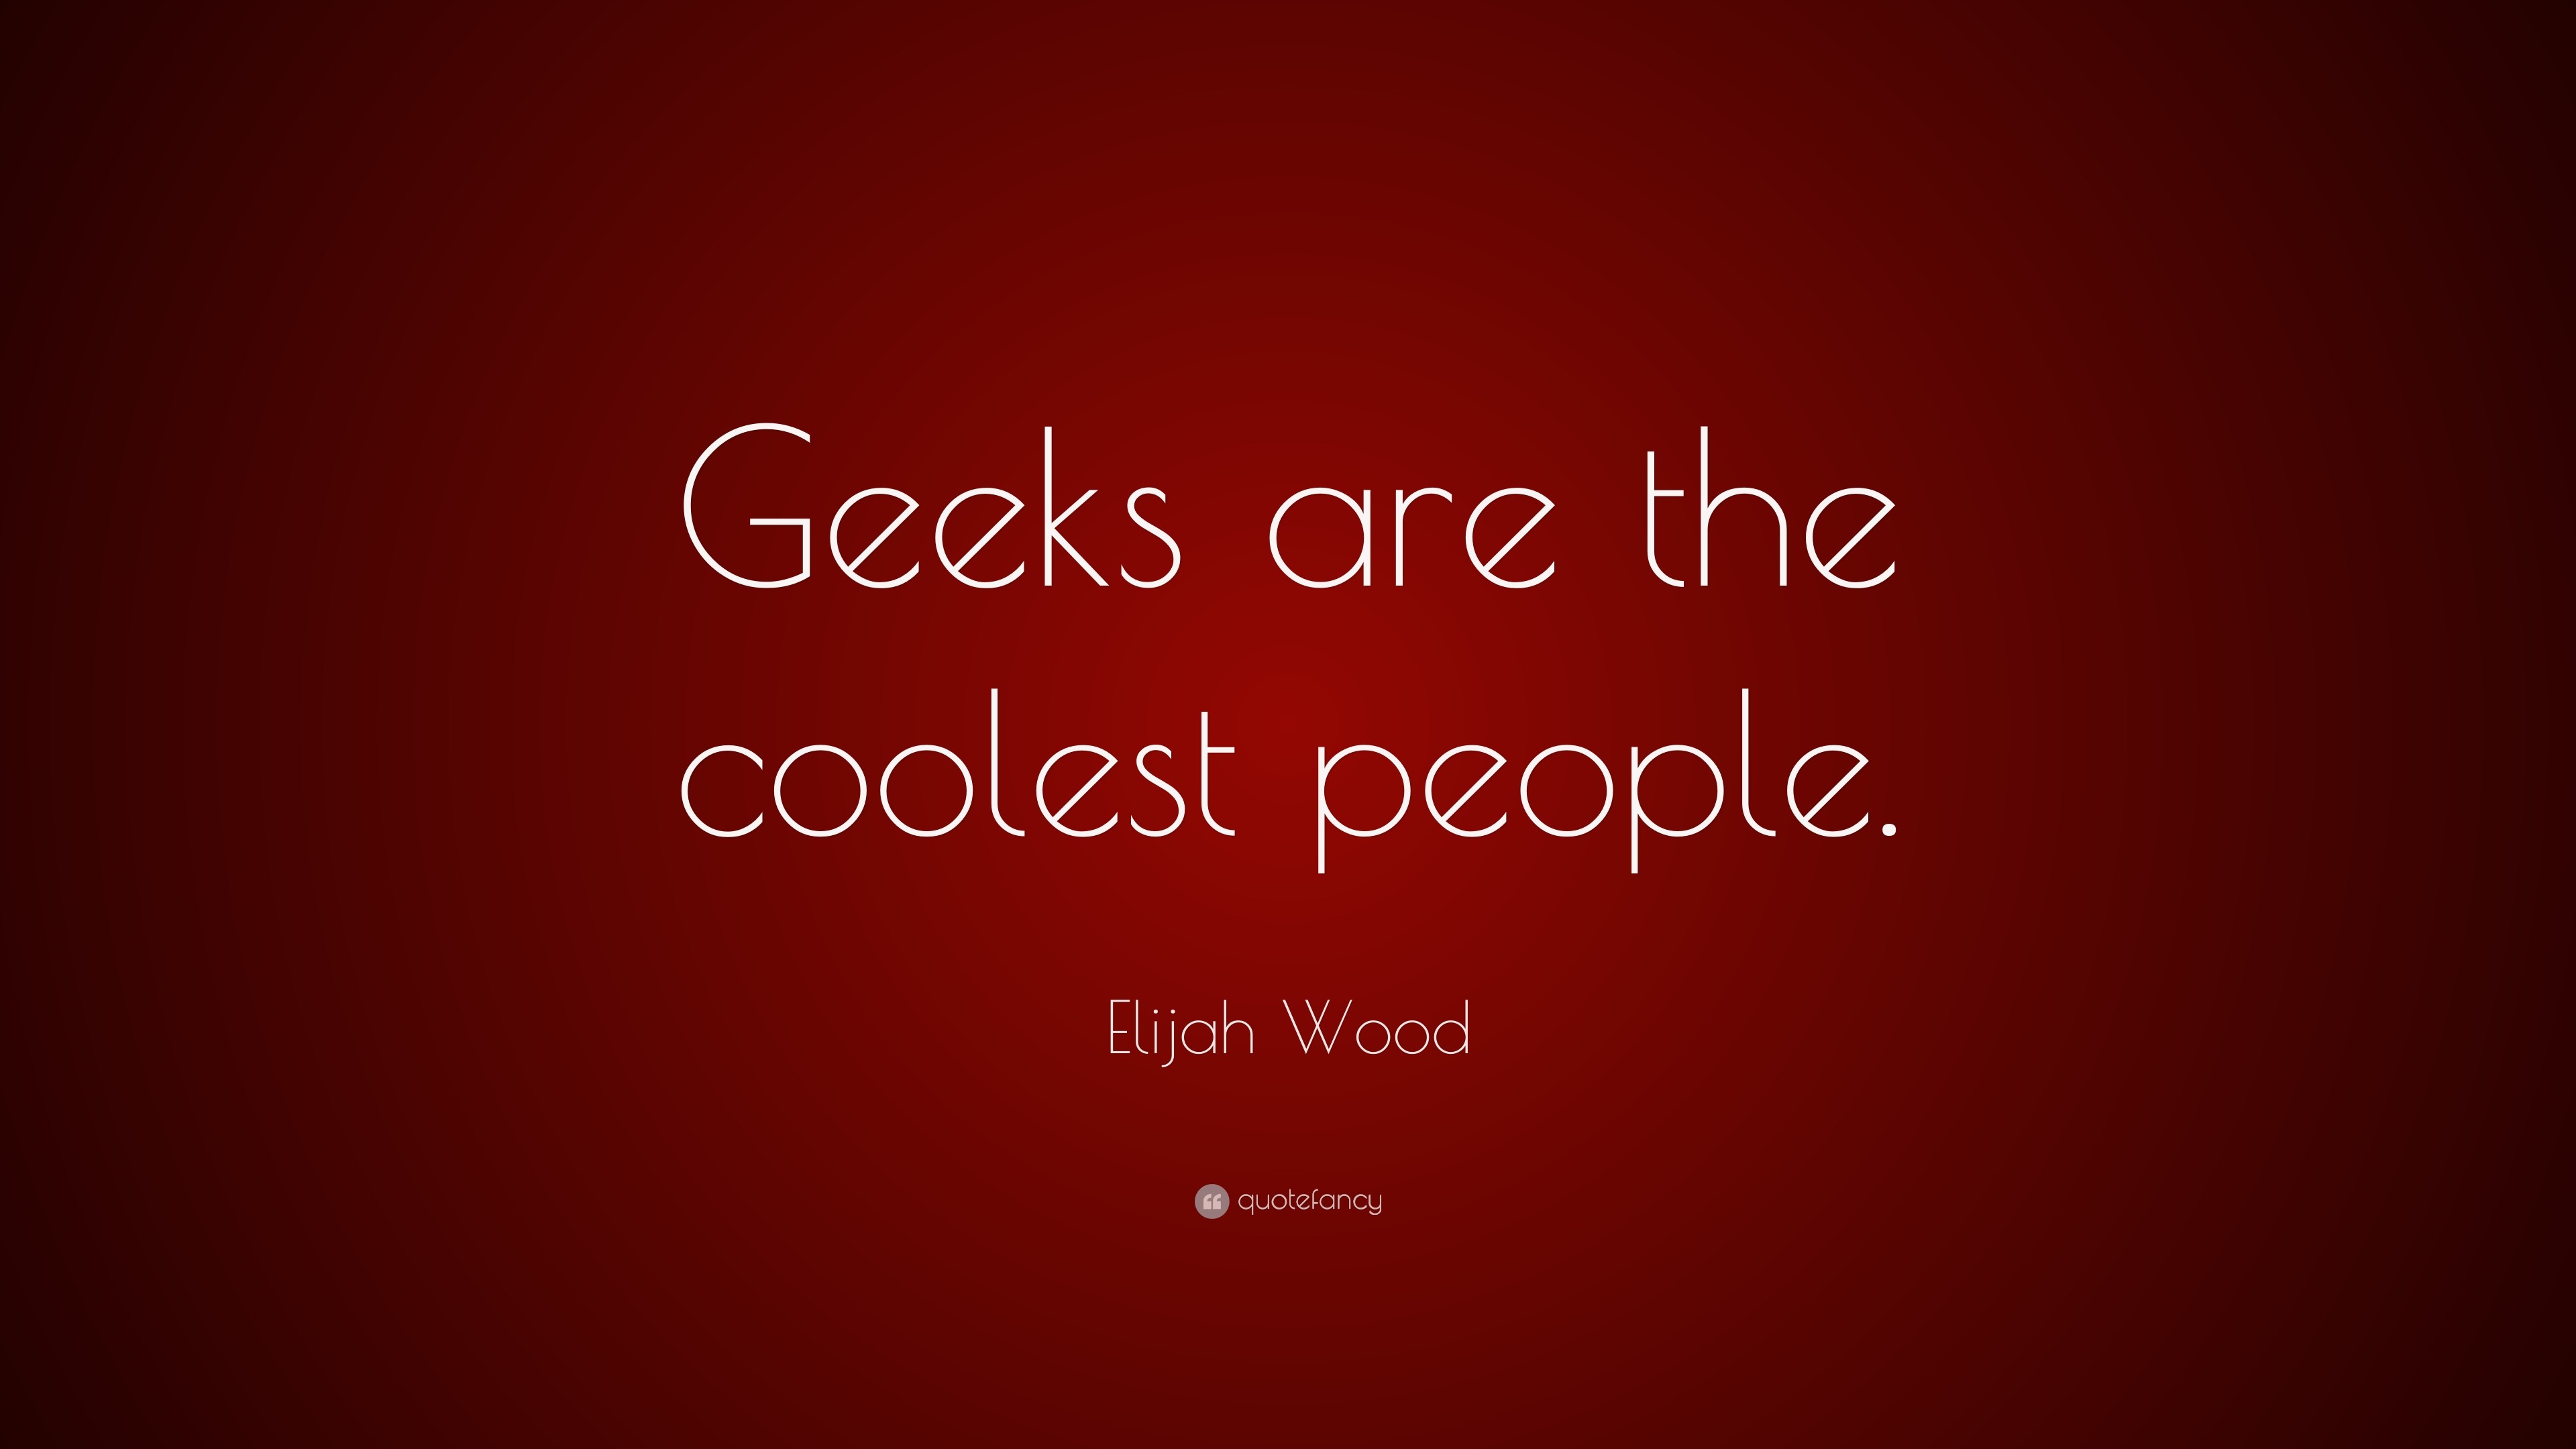 3840x2160 Elijah Wood Quote: “Geeks are the coolest people.”